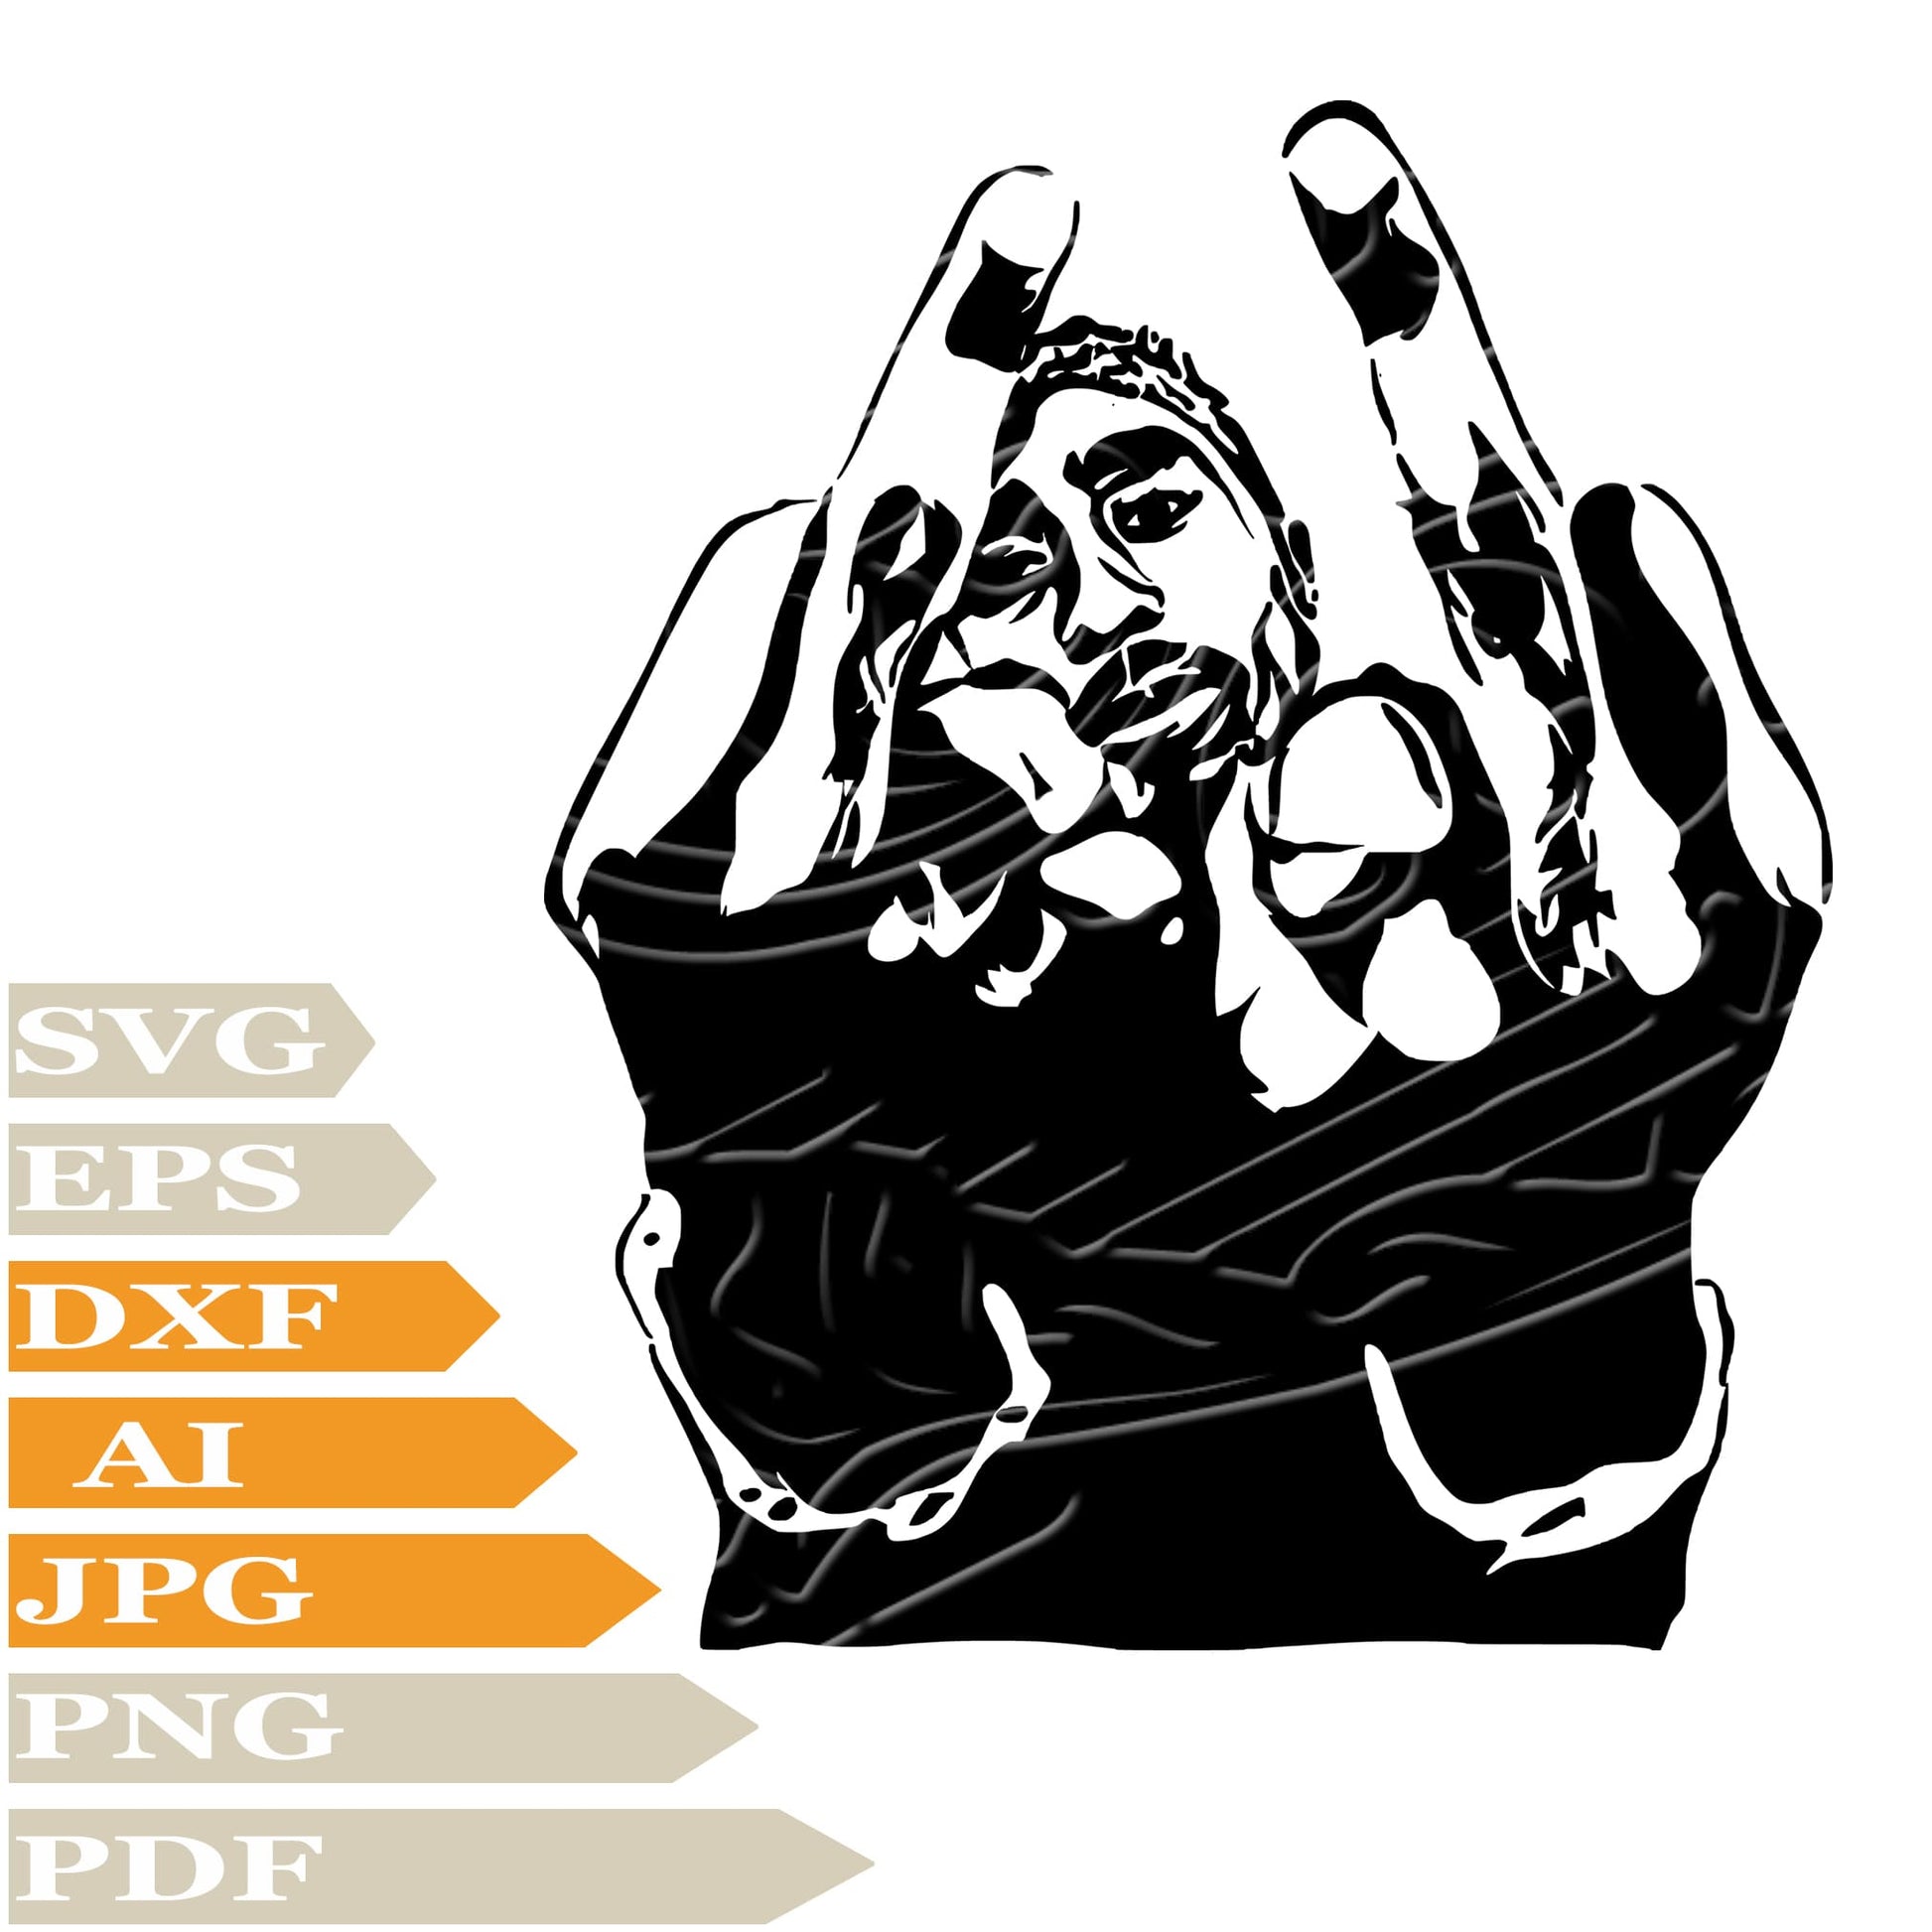 Tupac Shakur, 2Pac Svg File, Image Cut, Png, For Tattoo, Silhouette, Digital Vector Download, Cut File, Clipart, For Cricut